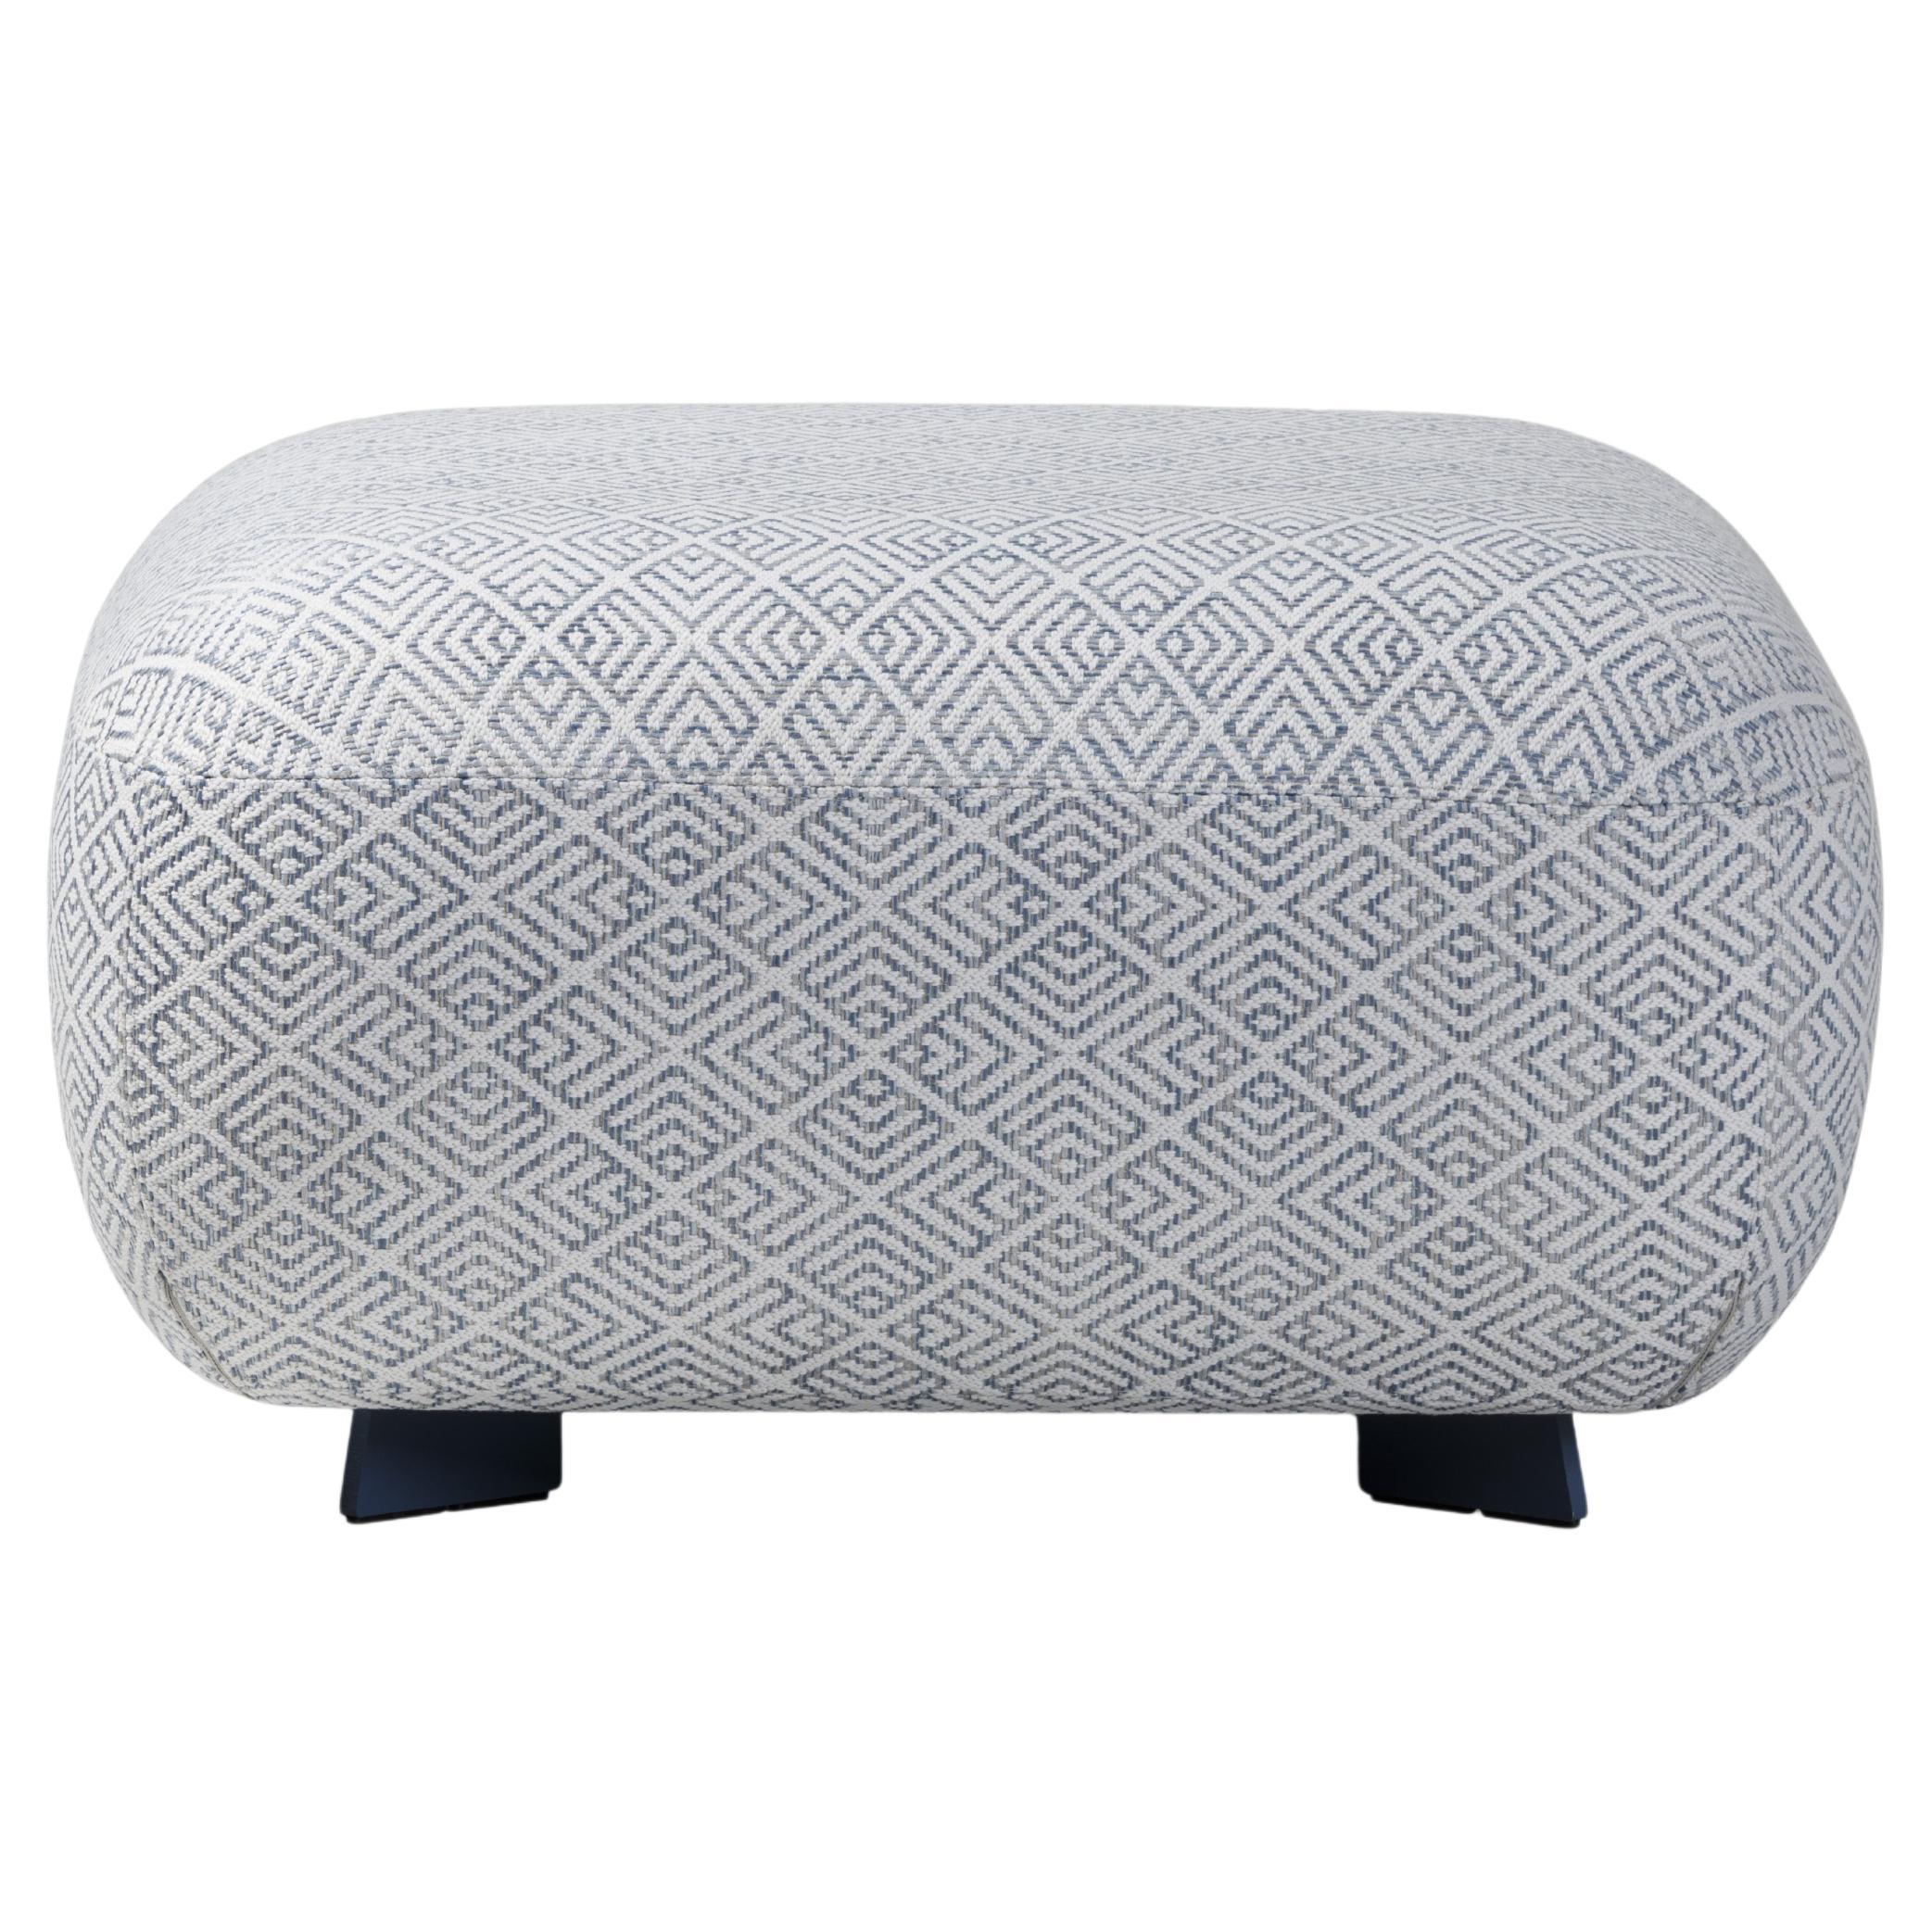 21st Century Modern Big Square Pouf for Outdoor Code Made in Italy